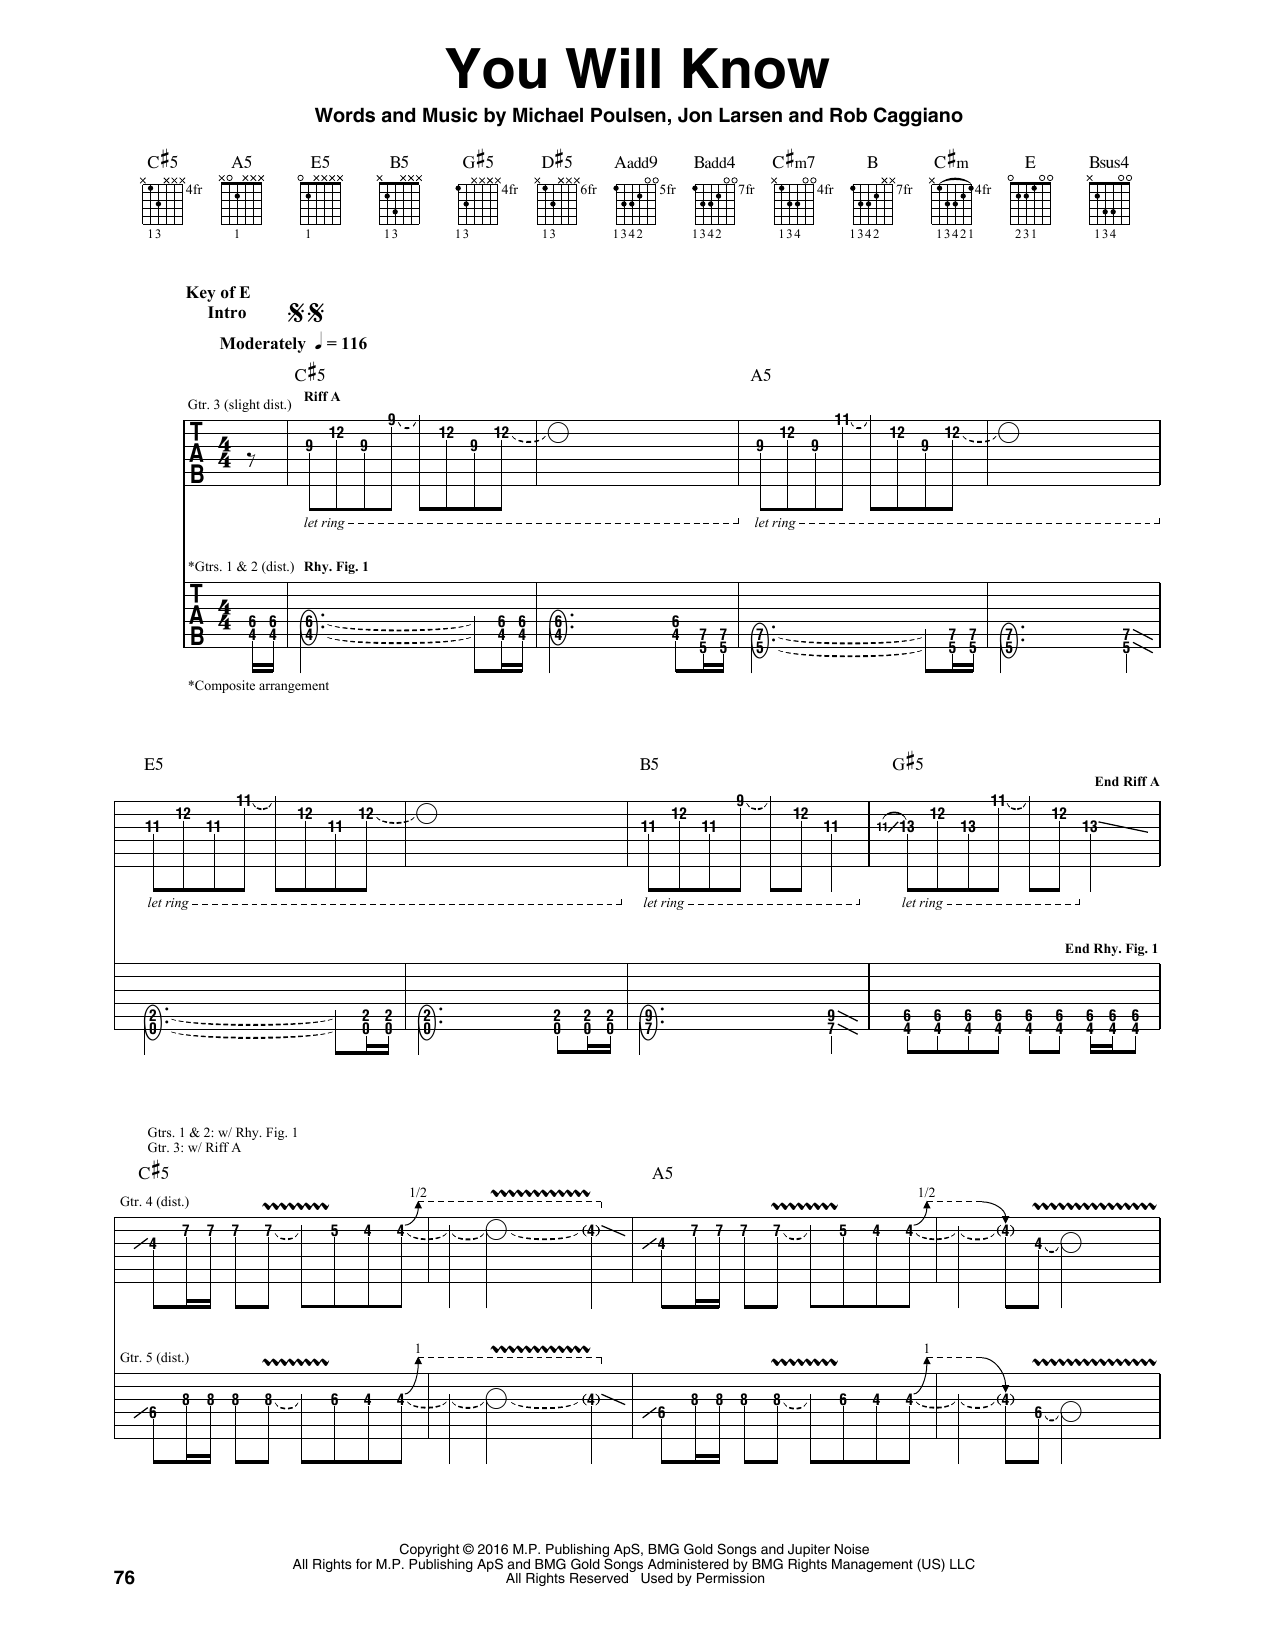 Download Volbeat You Will Know Sheet Music